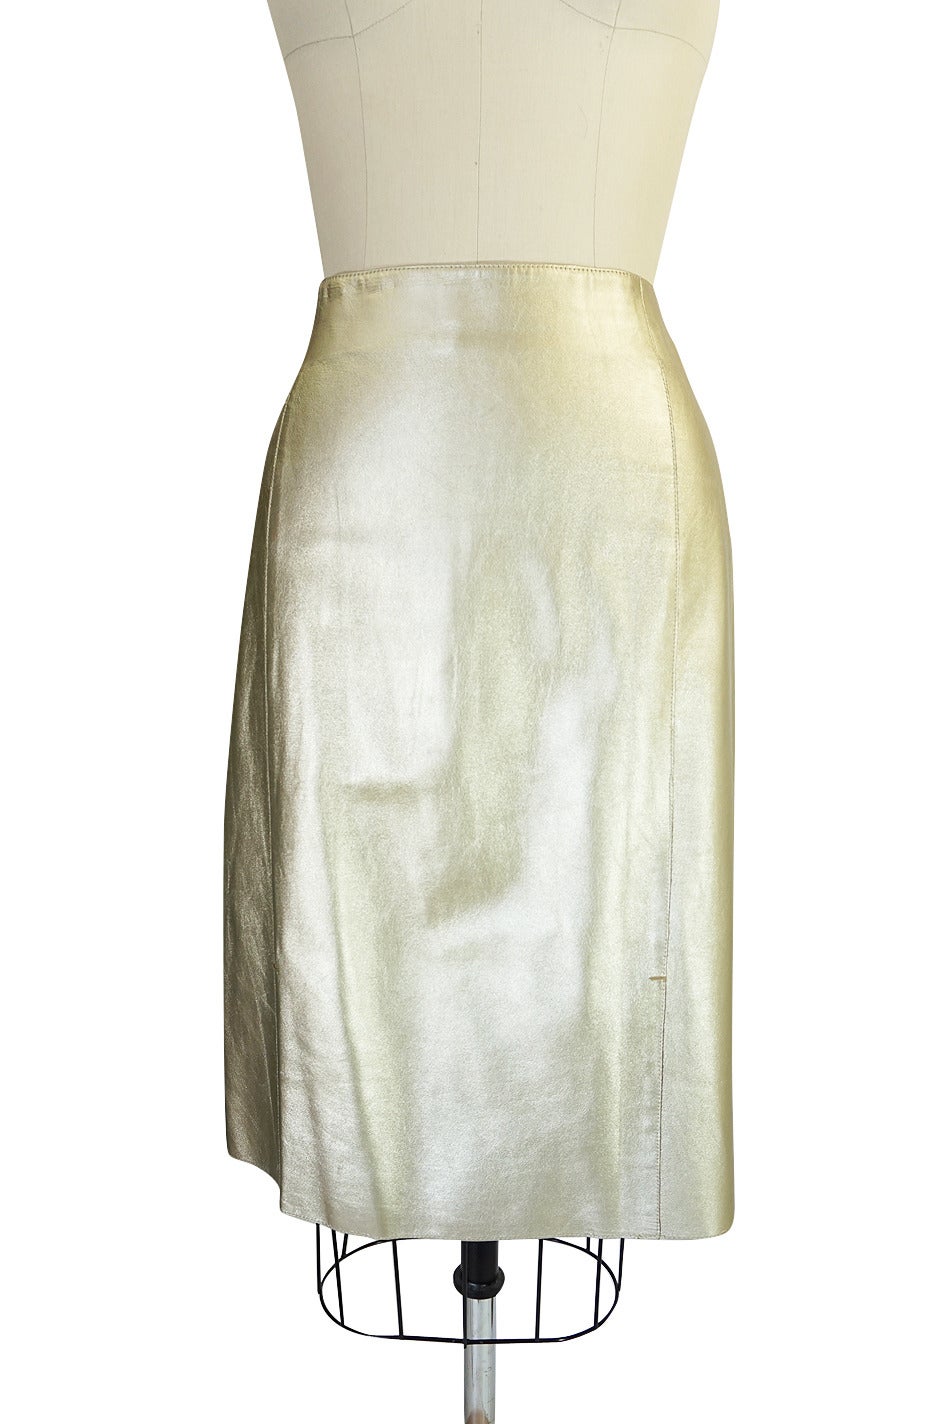 Recent Prada Muted Gold Fine Leather Skirt In Excellent Condition For Sale In Rockwood, ON